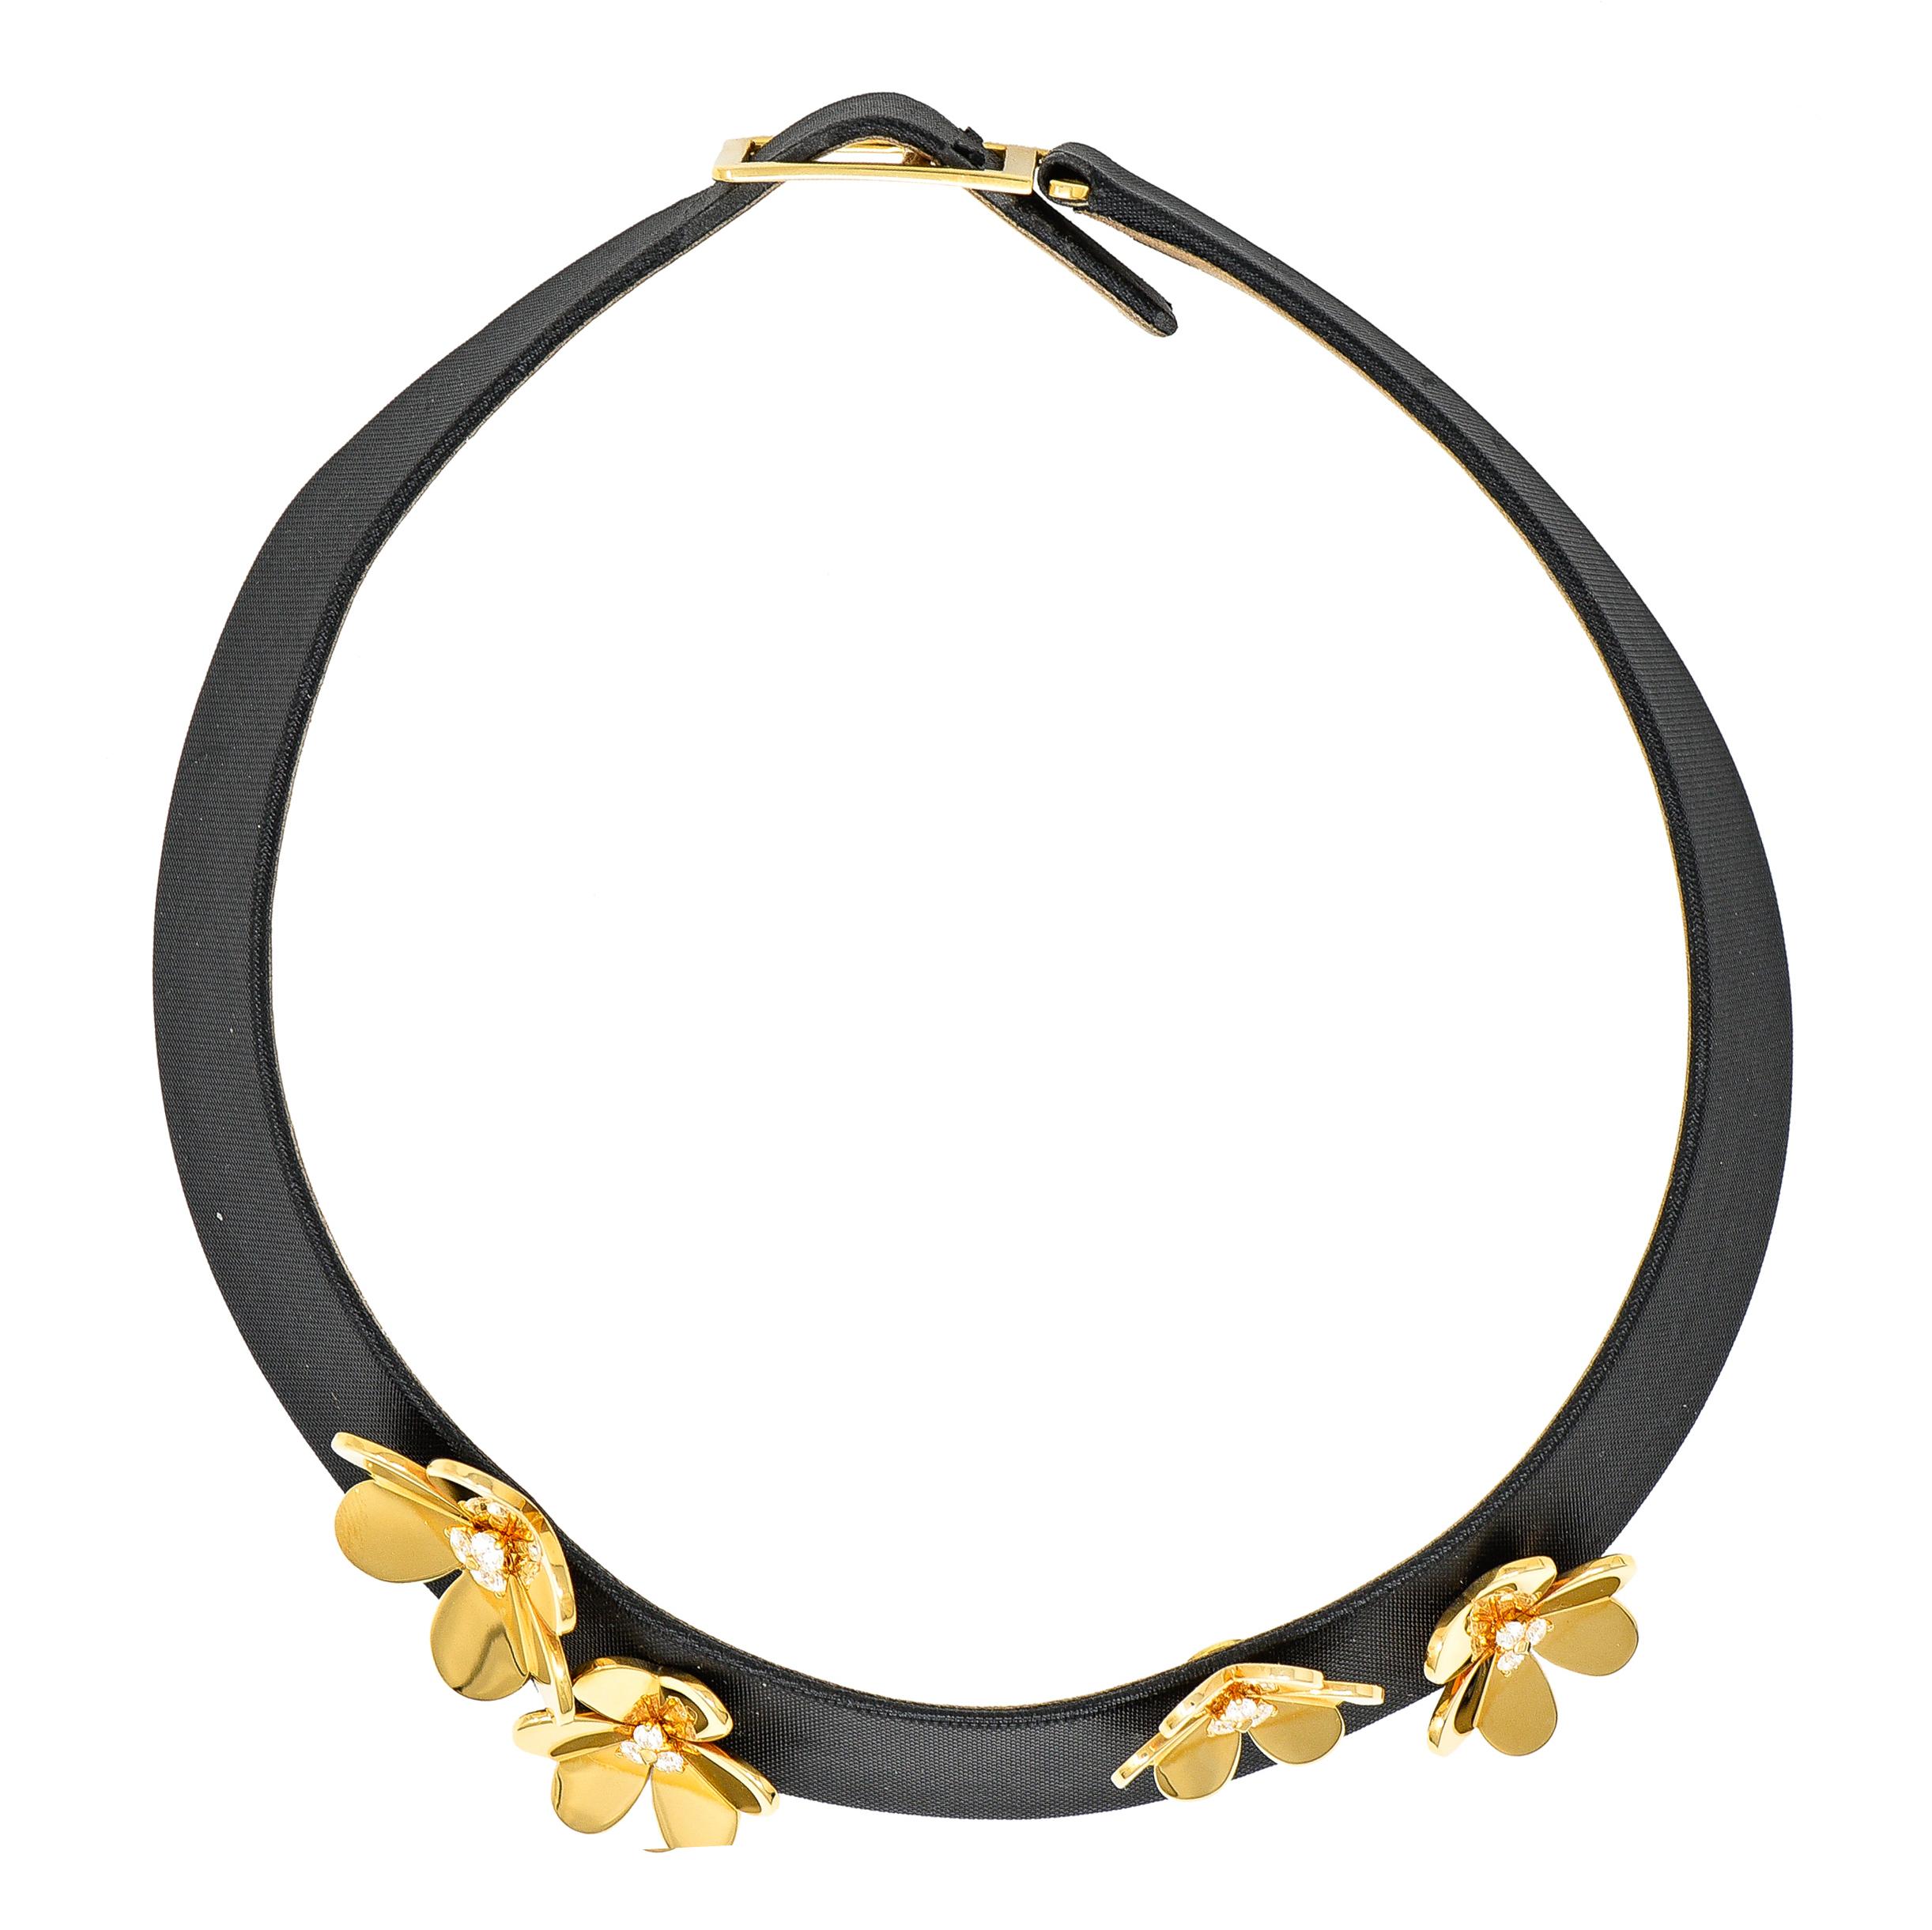 Designed as a wide black silk collar with four-dimensional gold three leaf clovers. High polished and centering clusters of prong set round brilliant cut diamonds. Weighing approximately 0.80 carat total - G/H color with VS clarity. Flowers can be